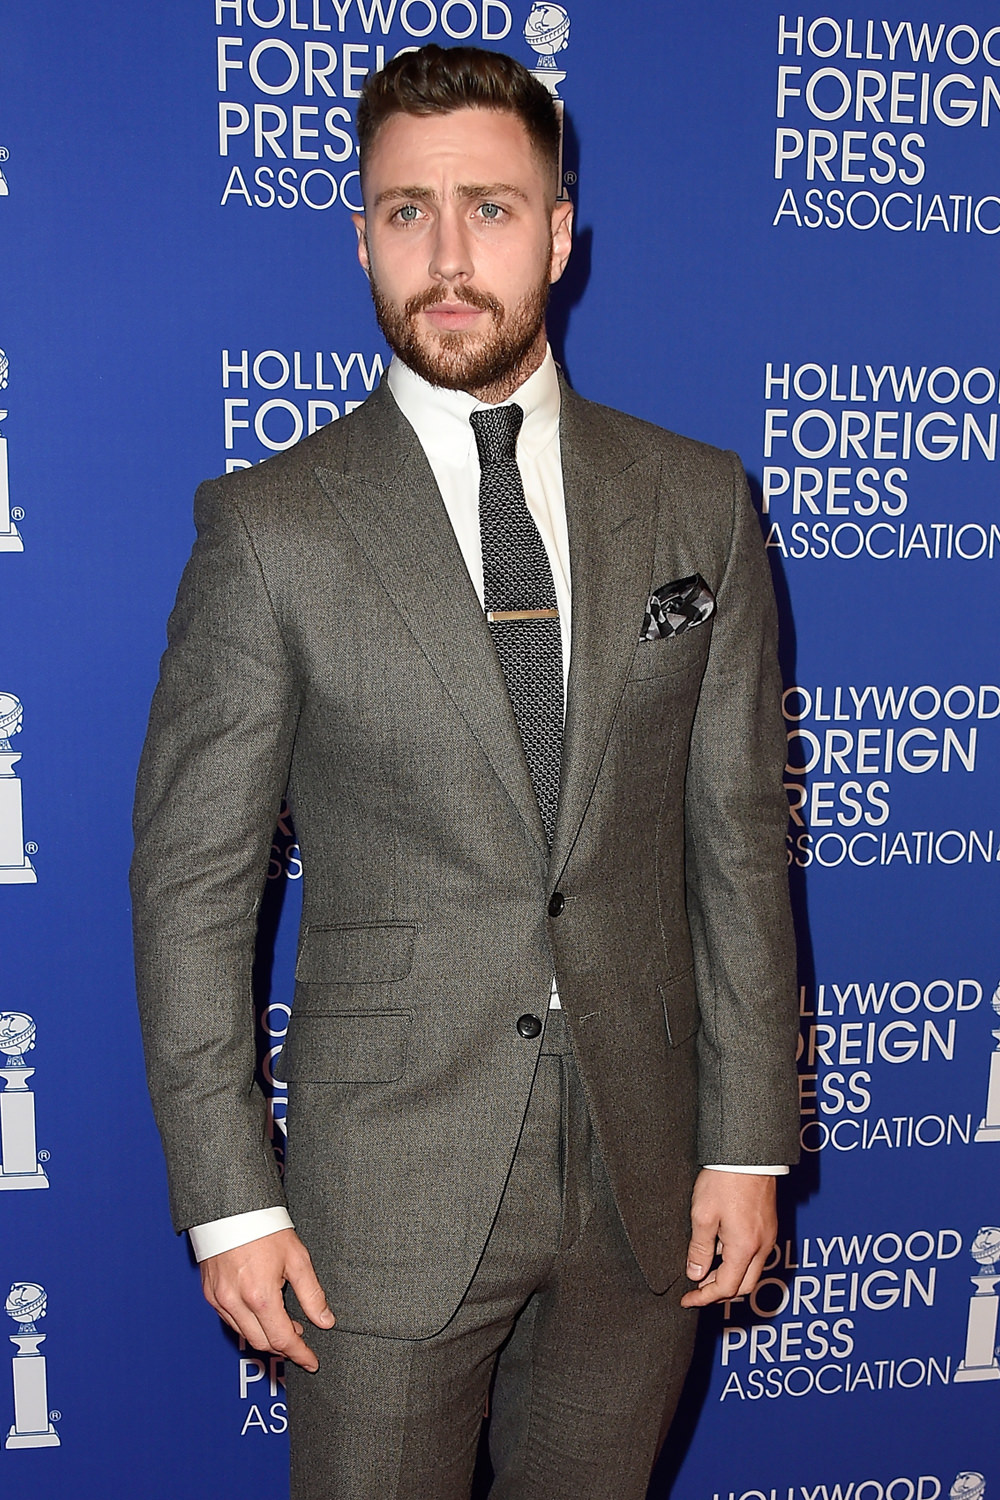 Aaaron-Taylor-Johnson-HHPA_Grants-Banquet-Red-Carpet-Fashion-Tom-Ford-Tom-Lorenzo-Site (1)